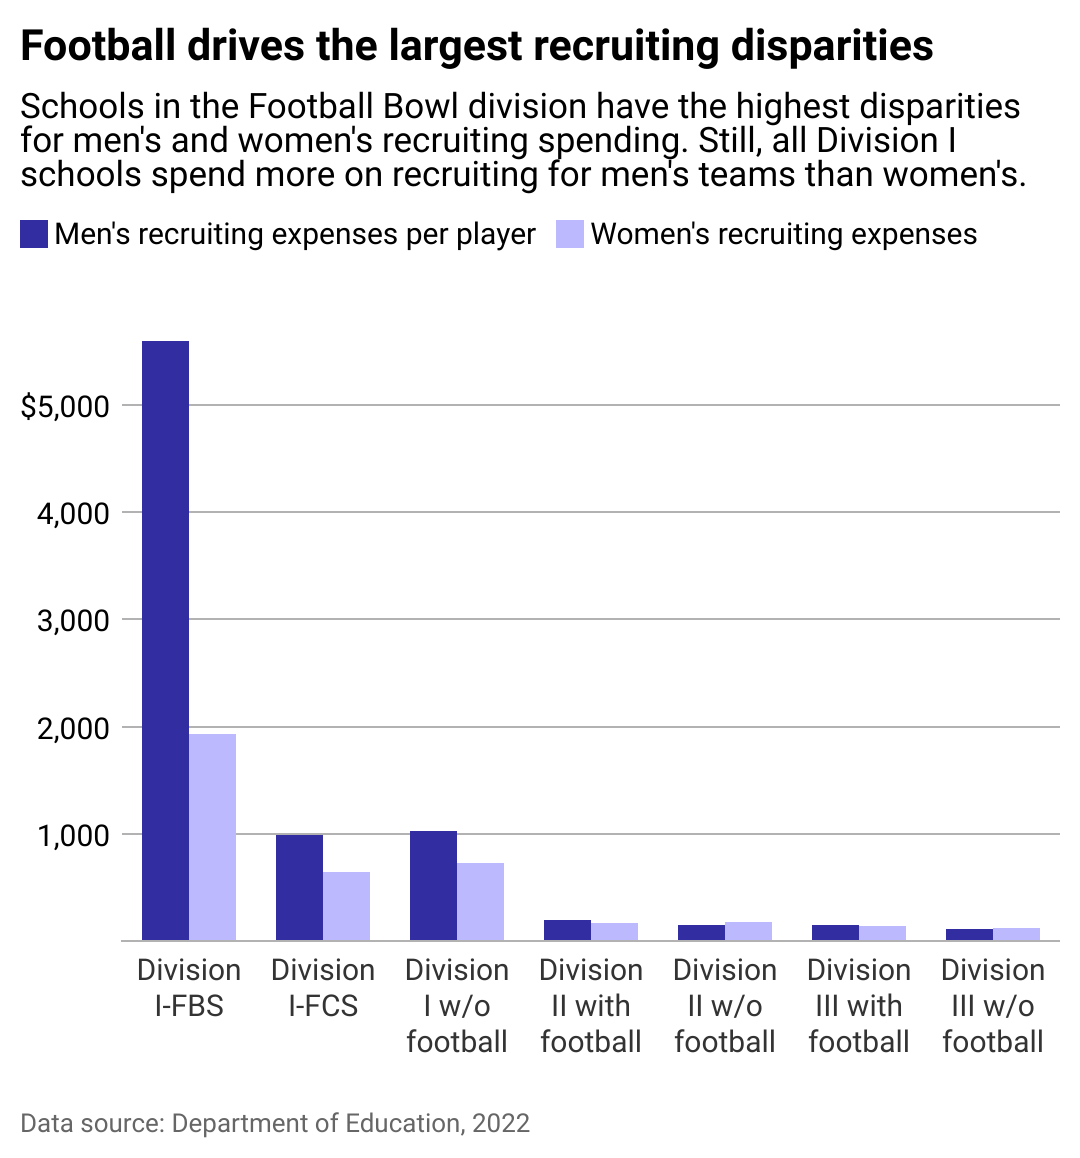 A bar chart showing that football drives the largest recruiting disparities. Schools in the Football Bowl division have the highest disparities for men's and women's recruiting spending. Still, all Division one schools spend more on recruiting for men's teams than women's. 